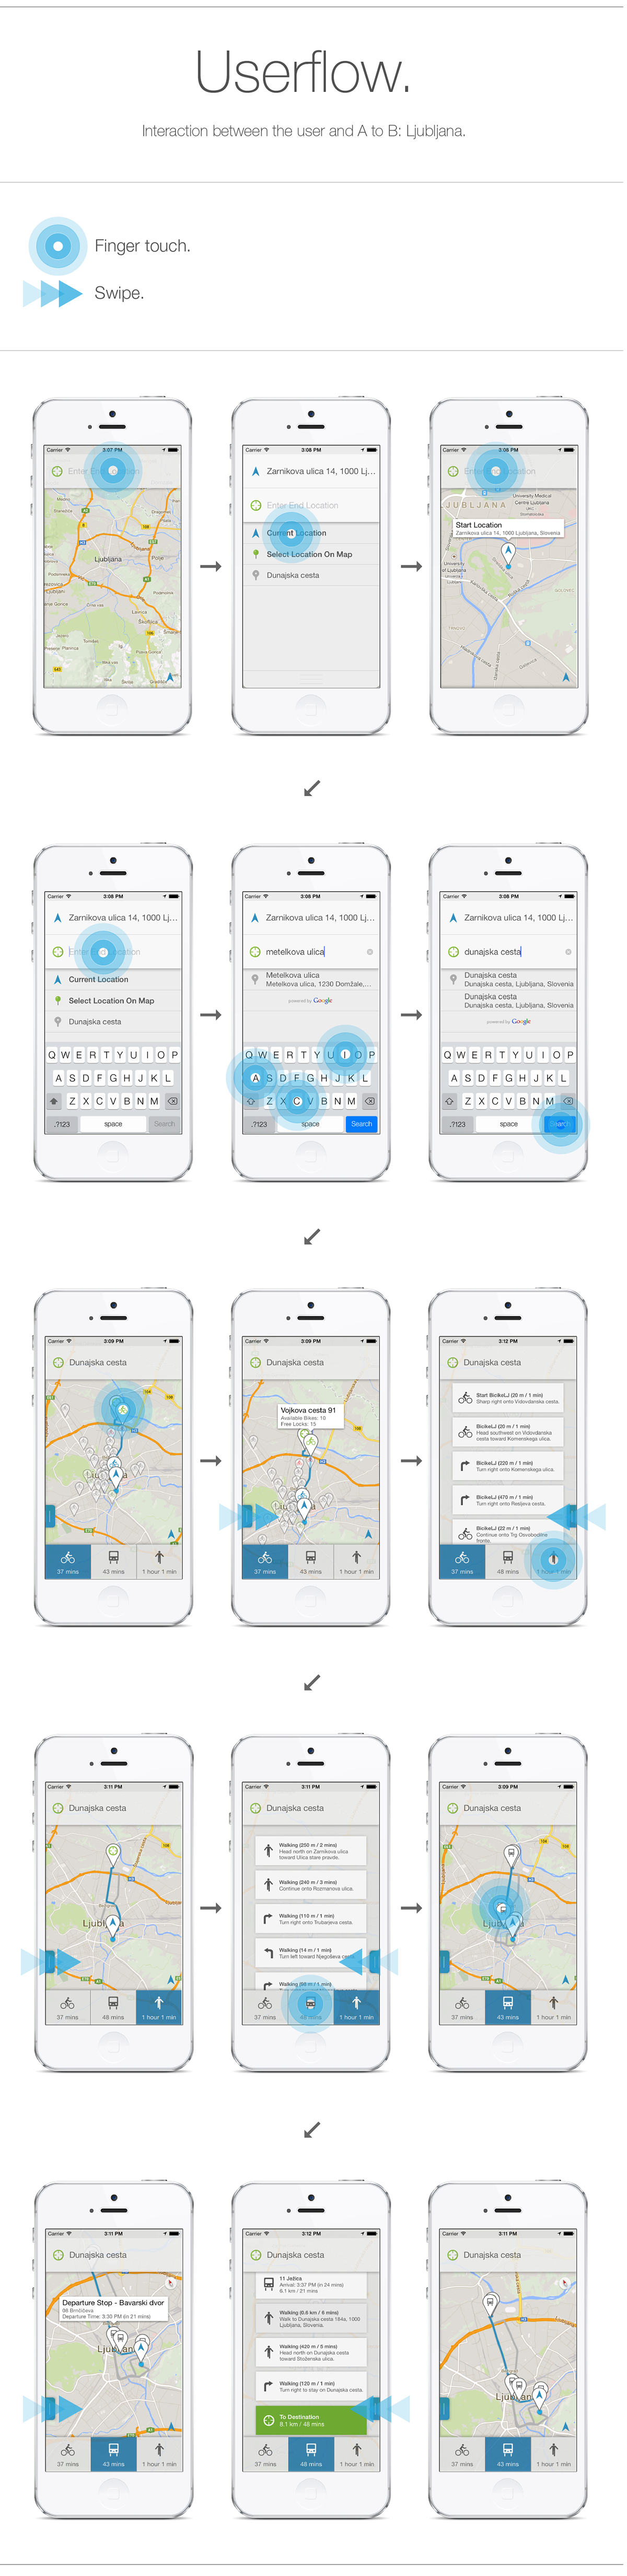 A do B: ljubljana A to B: ios7 ios Mobile app iphone app LPP UX  Sustainable Design public transport sustainable transport  green city ecological